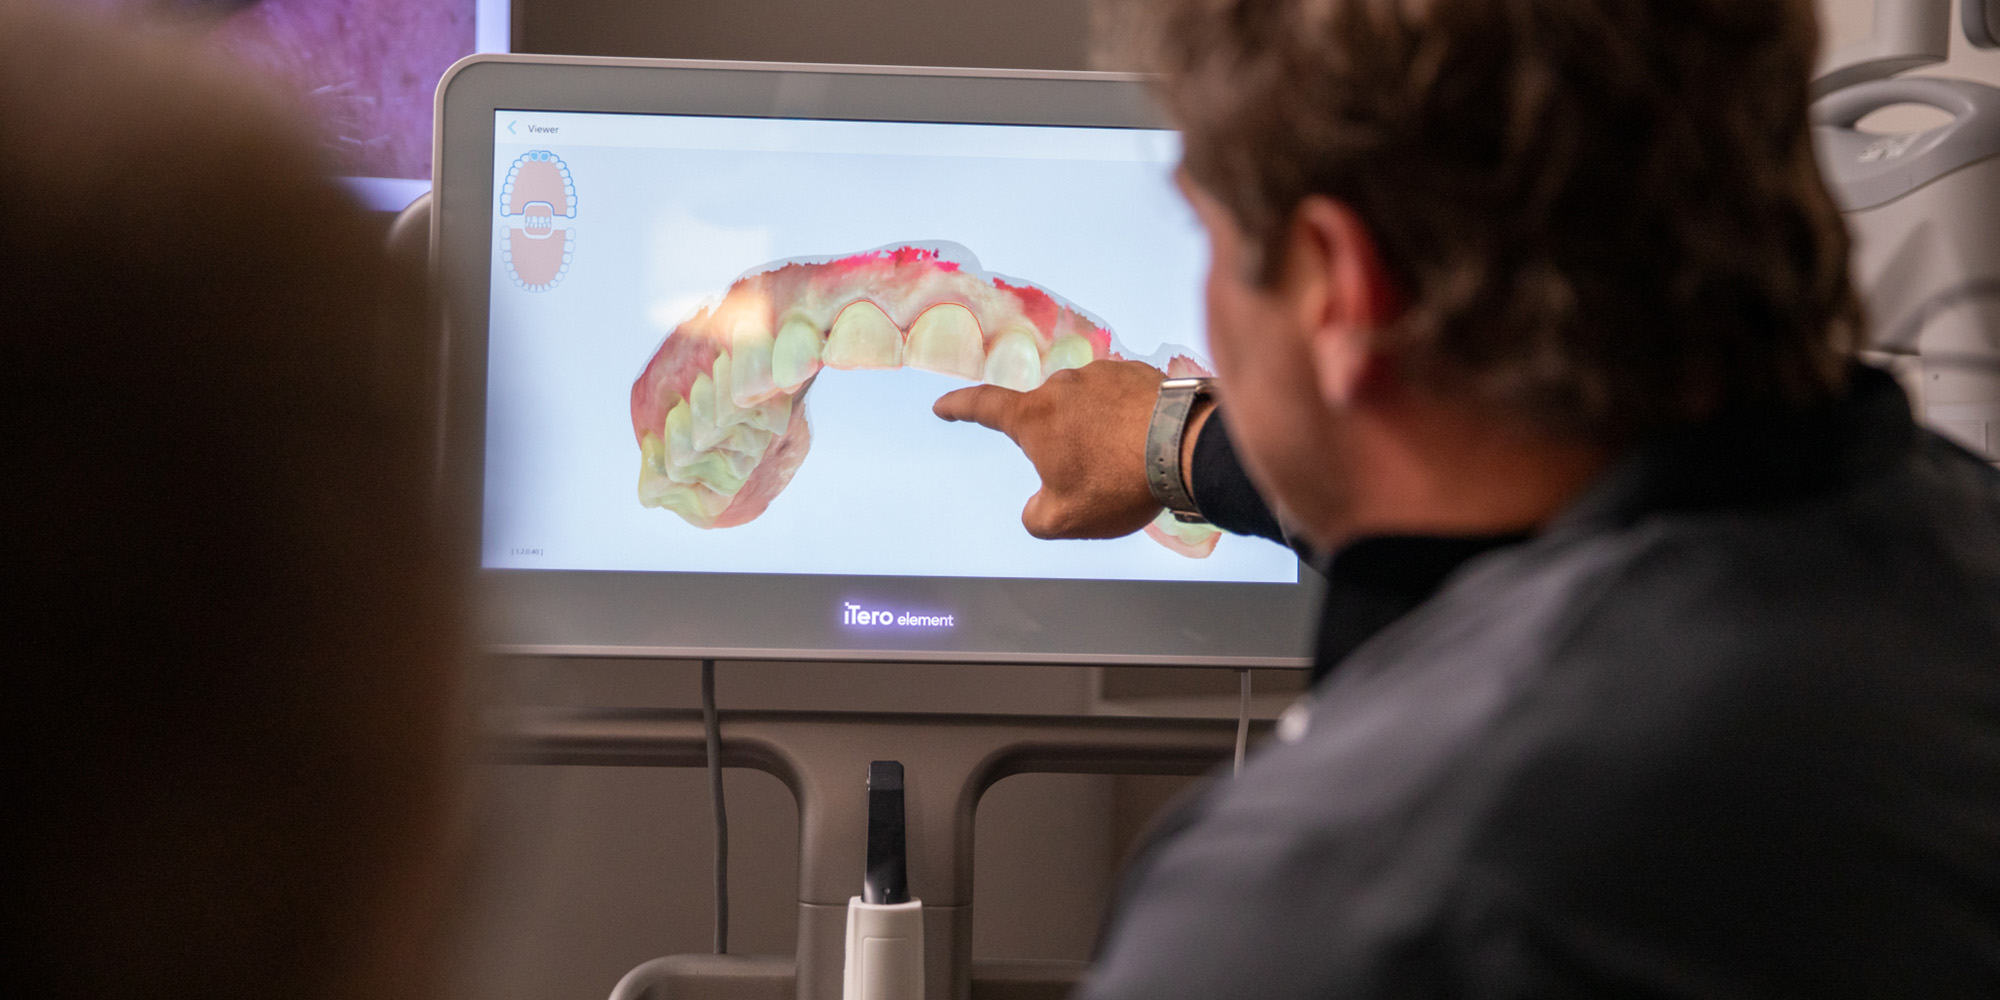 Prosthodontist Dr. Dean Kois pointing at monitor showing 3D image of a patient's upper arch.